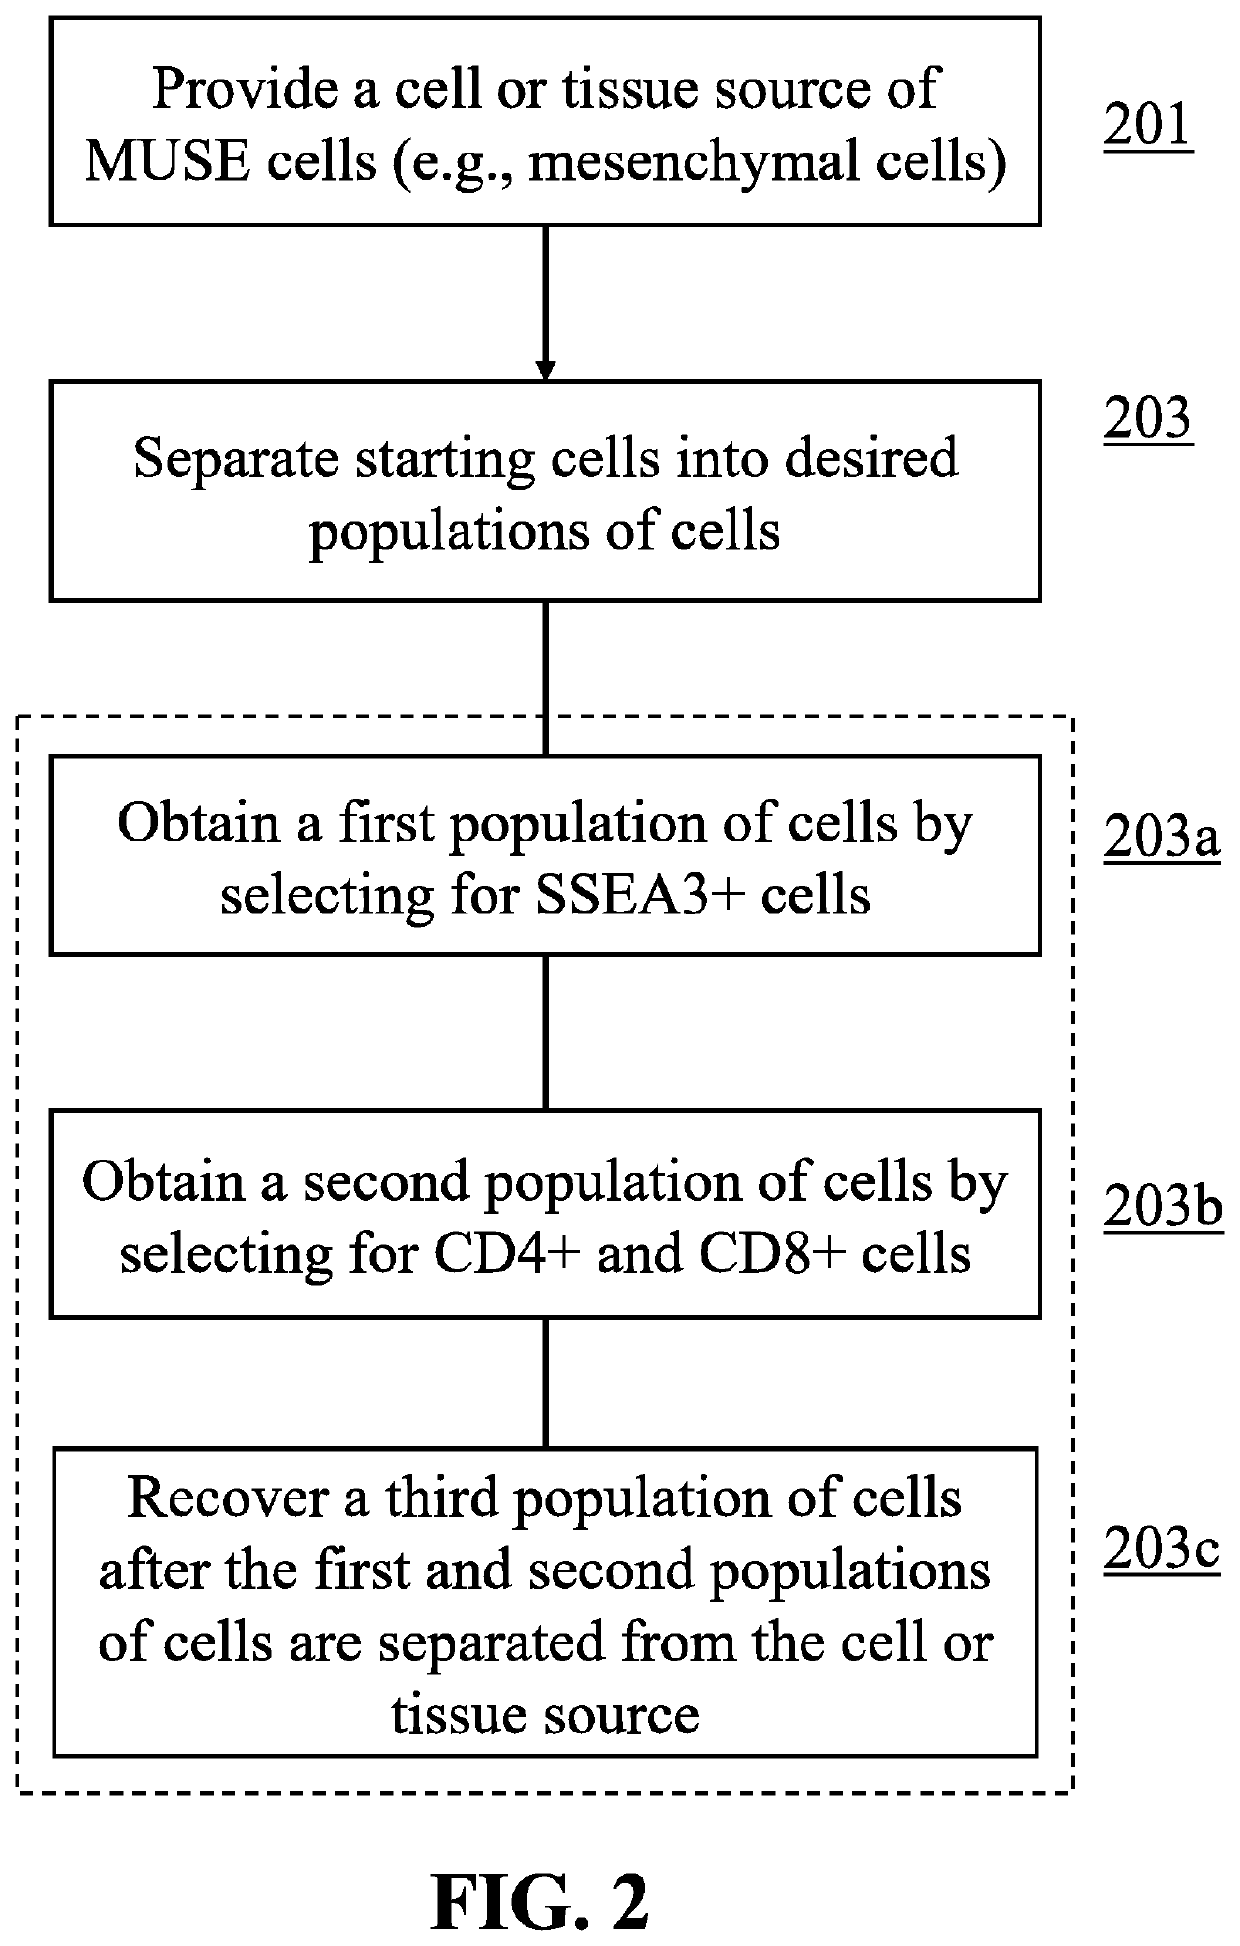 Methods for enriching populations of cells